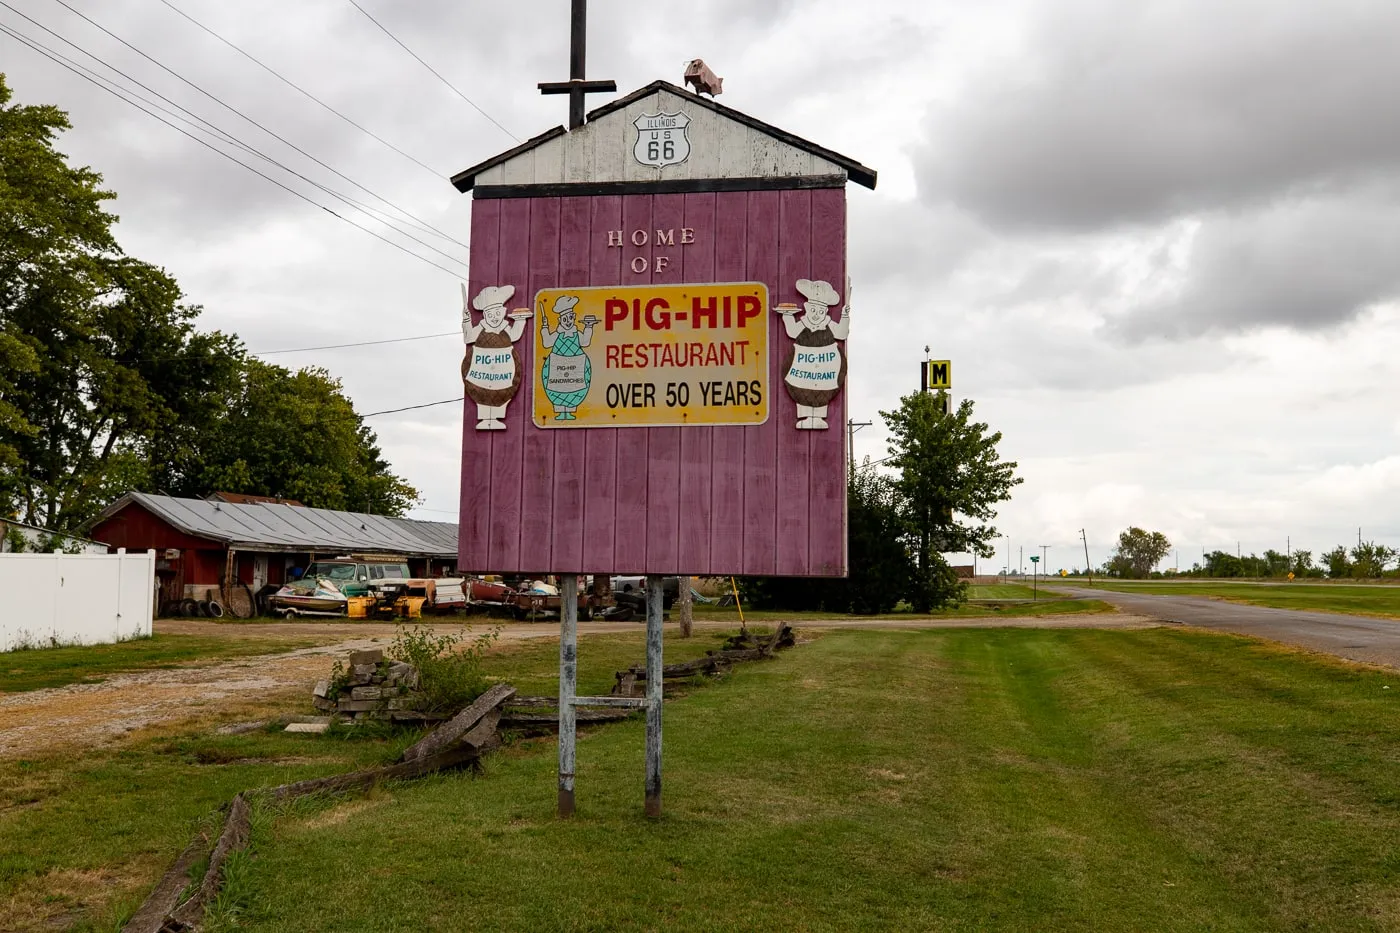 Pig Hip Sign & Restaurant Memorial in Broadwell, Illinois Route 66